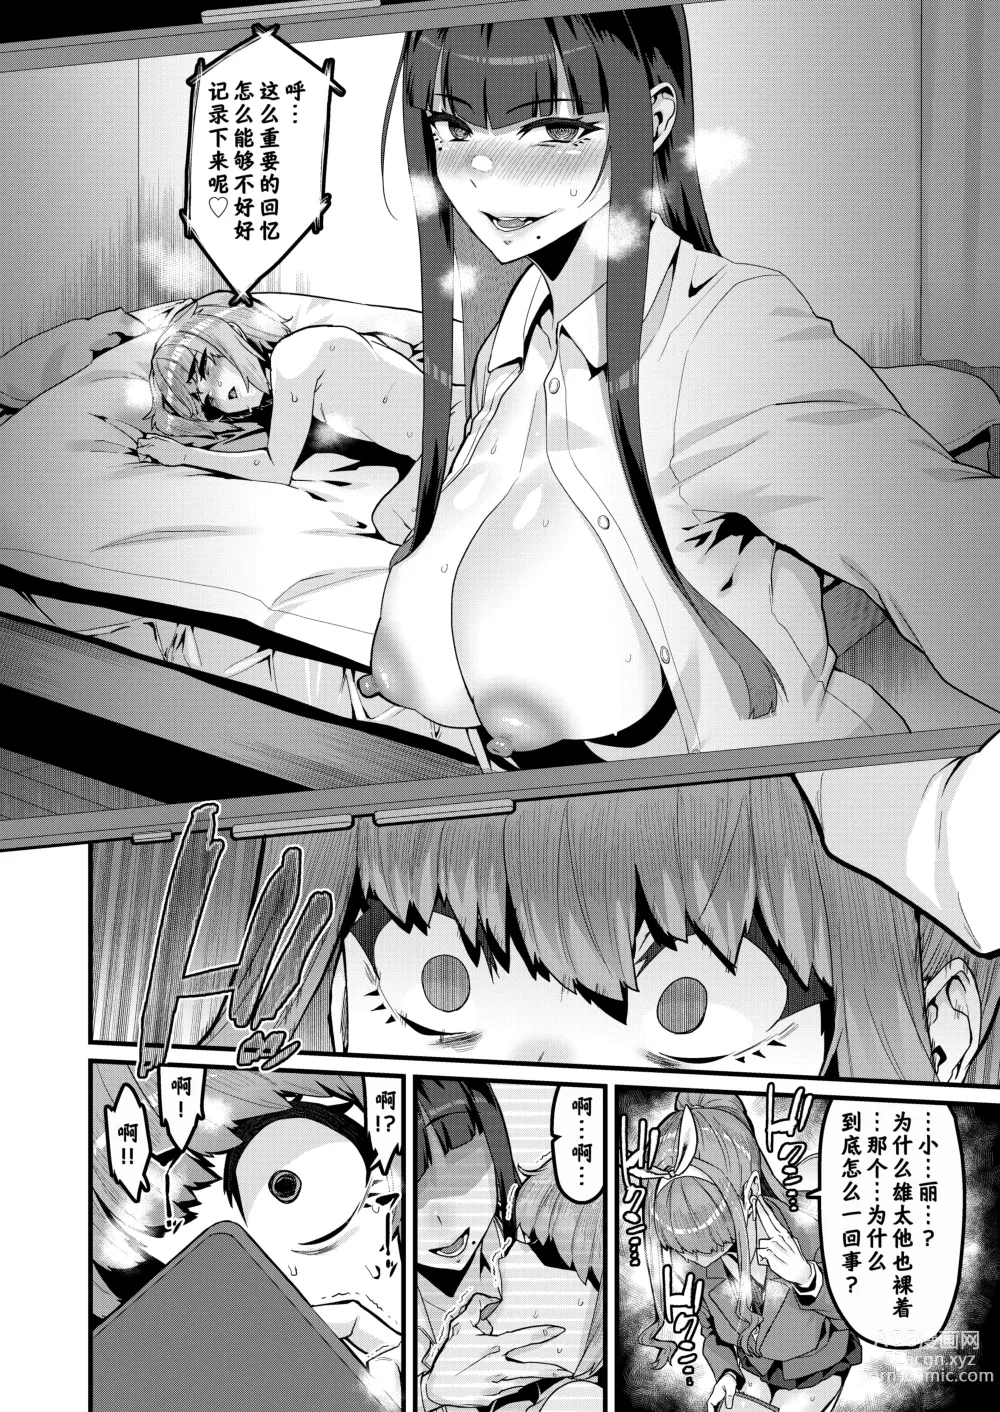 Page 7 of doujinshi 青梅竹马到此为止